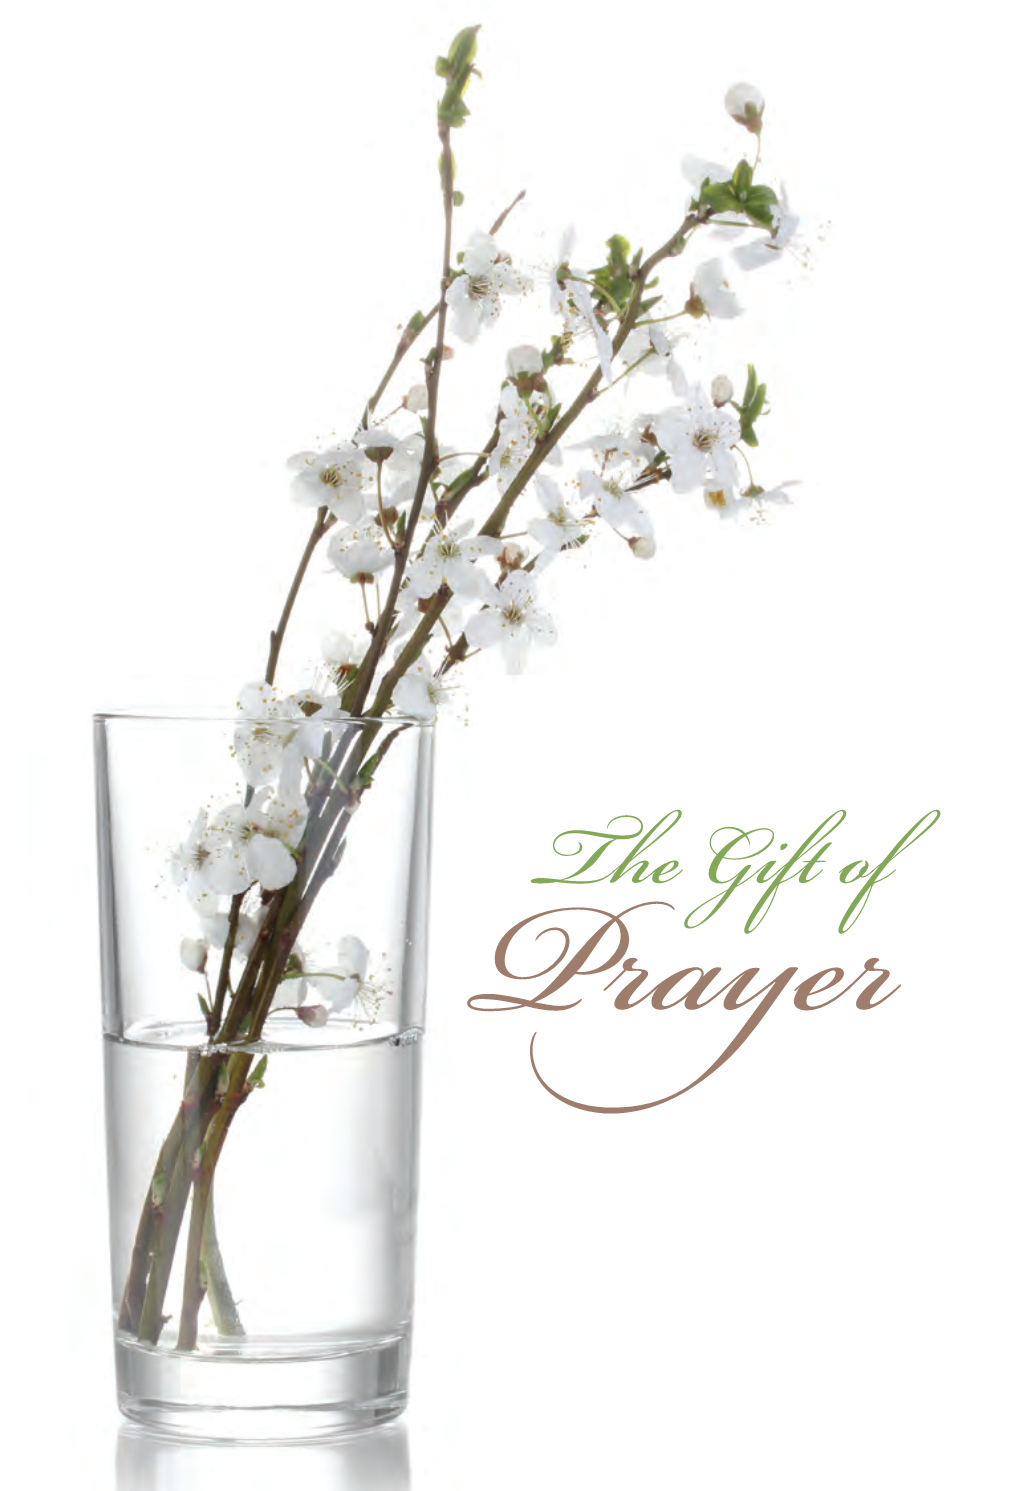 The Gift of Prayer Reminds Us There Are Many Ways to Pray, but All of Them Make a Difference